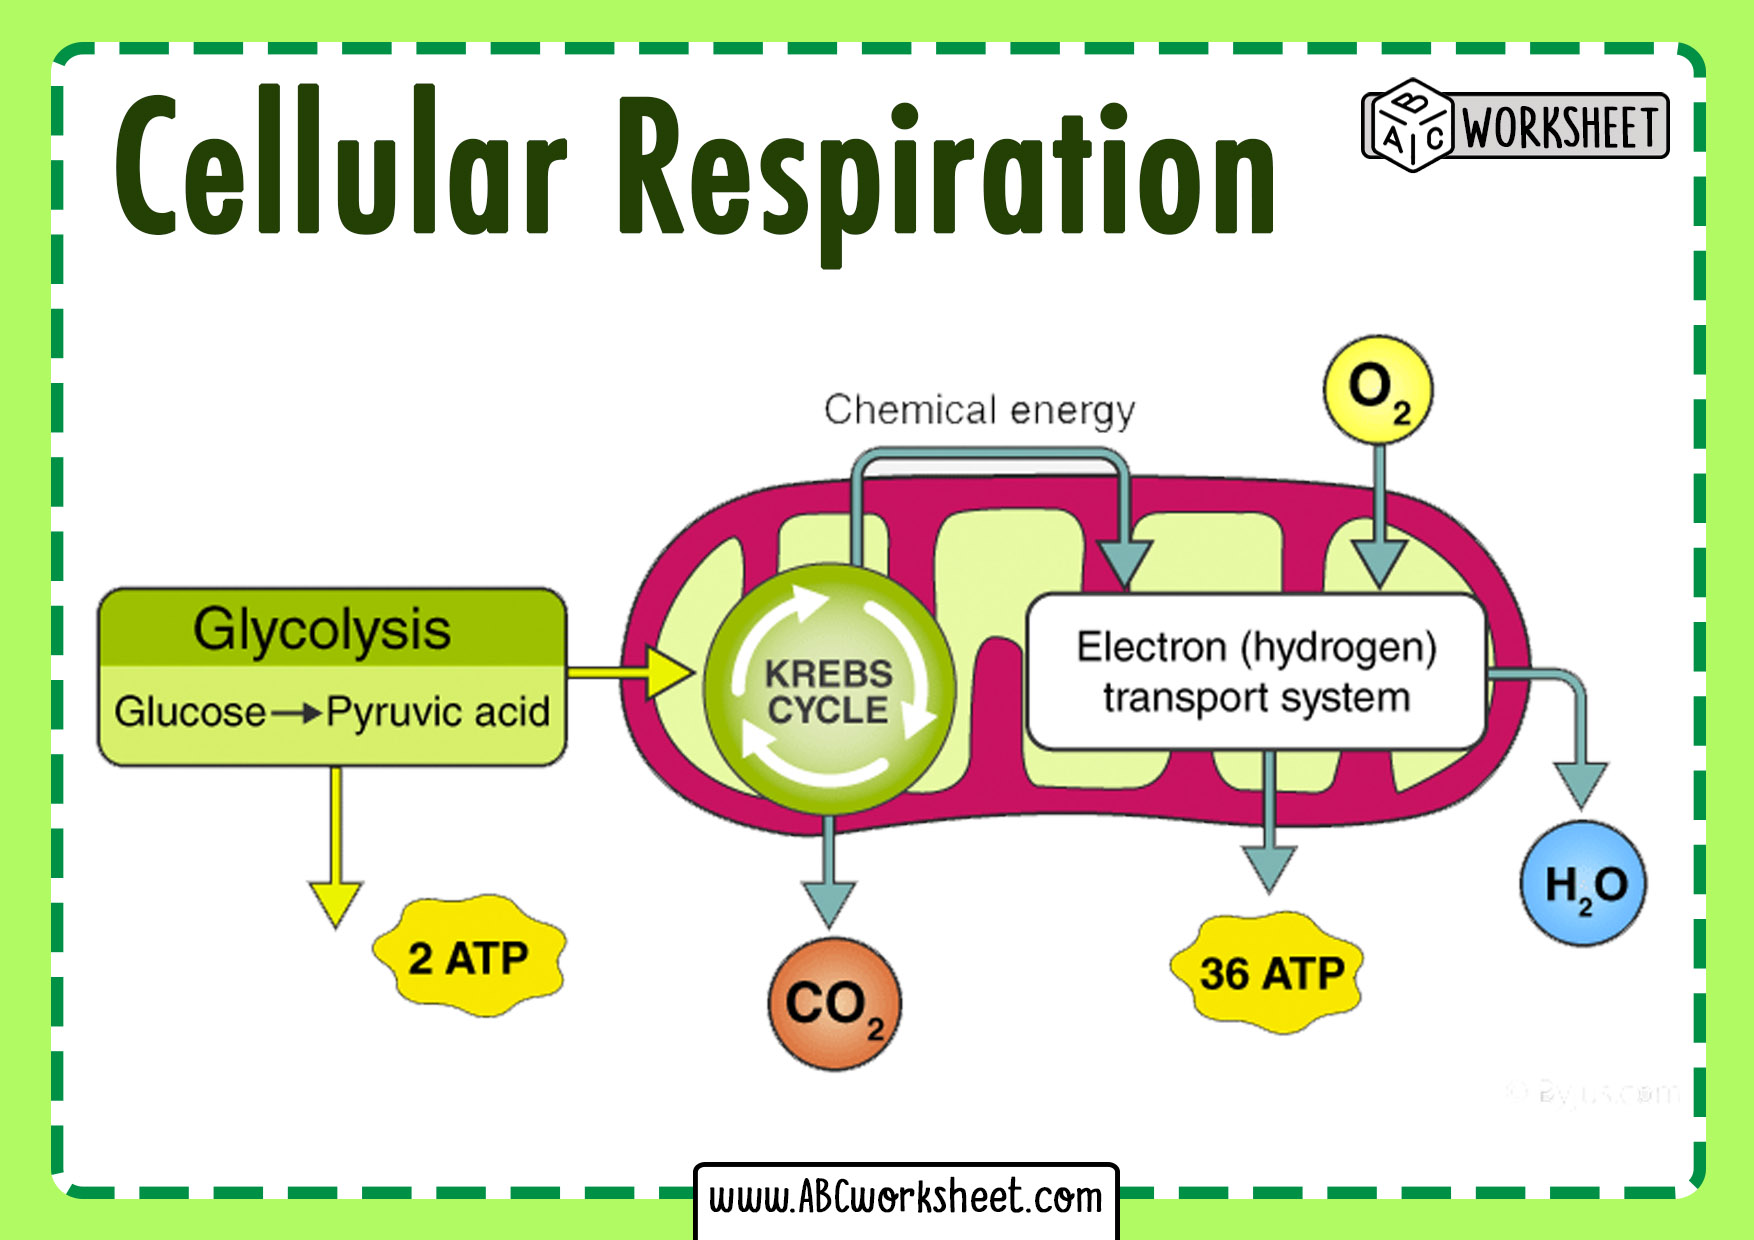 Steps of the Cellular Respiration Cycle ABC Worksheet